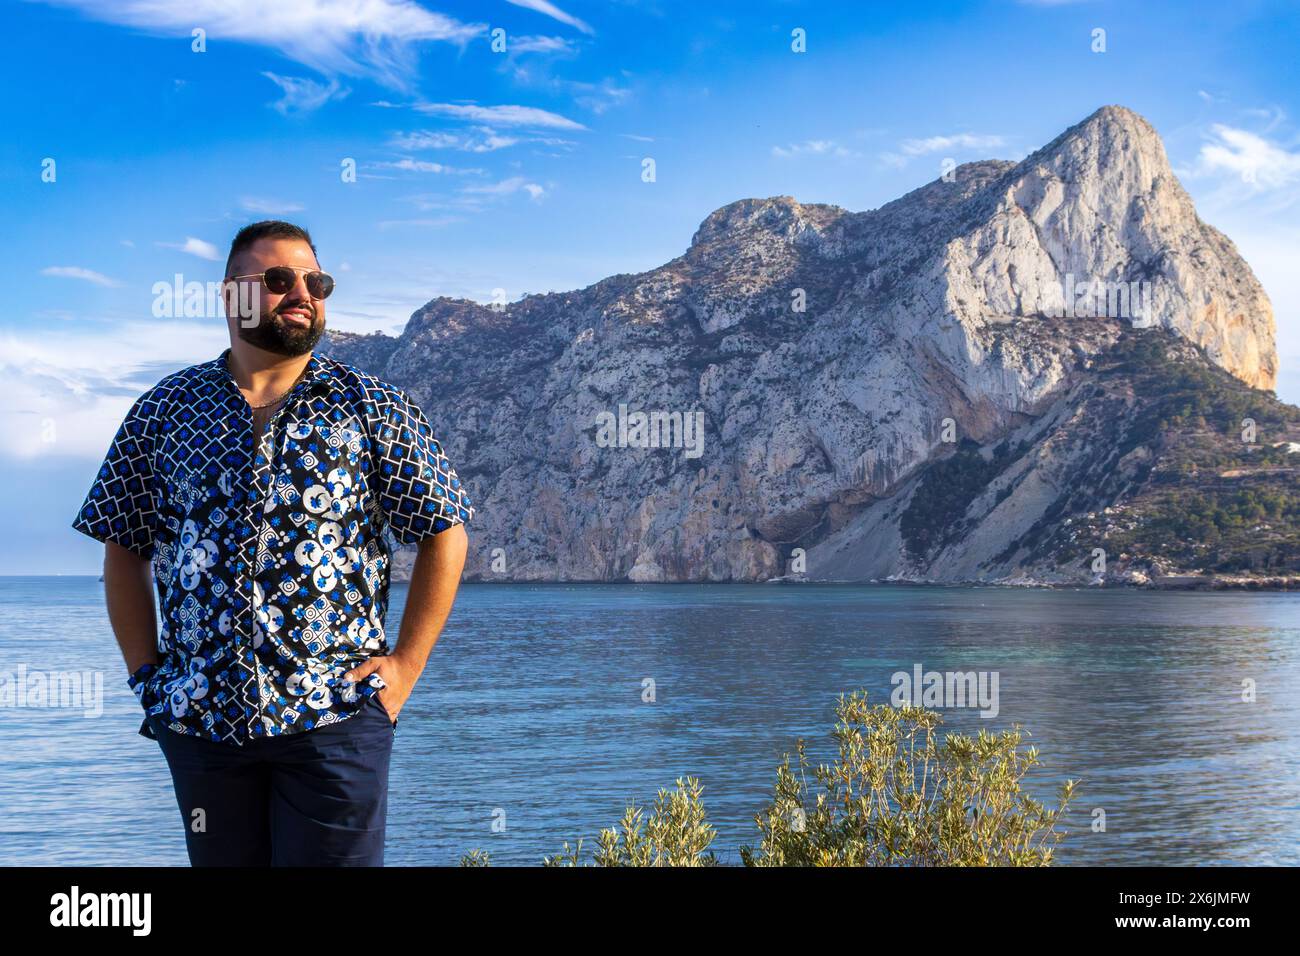 This portrait captures a 30-year-old man as he stands in serene contemplation, with the majestic Ifach Mountain of Calpe, Spain. Stock Photo